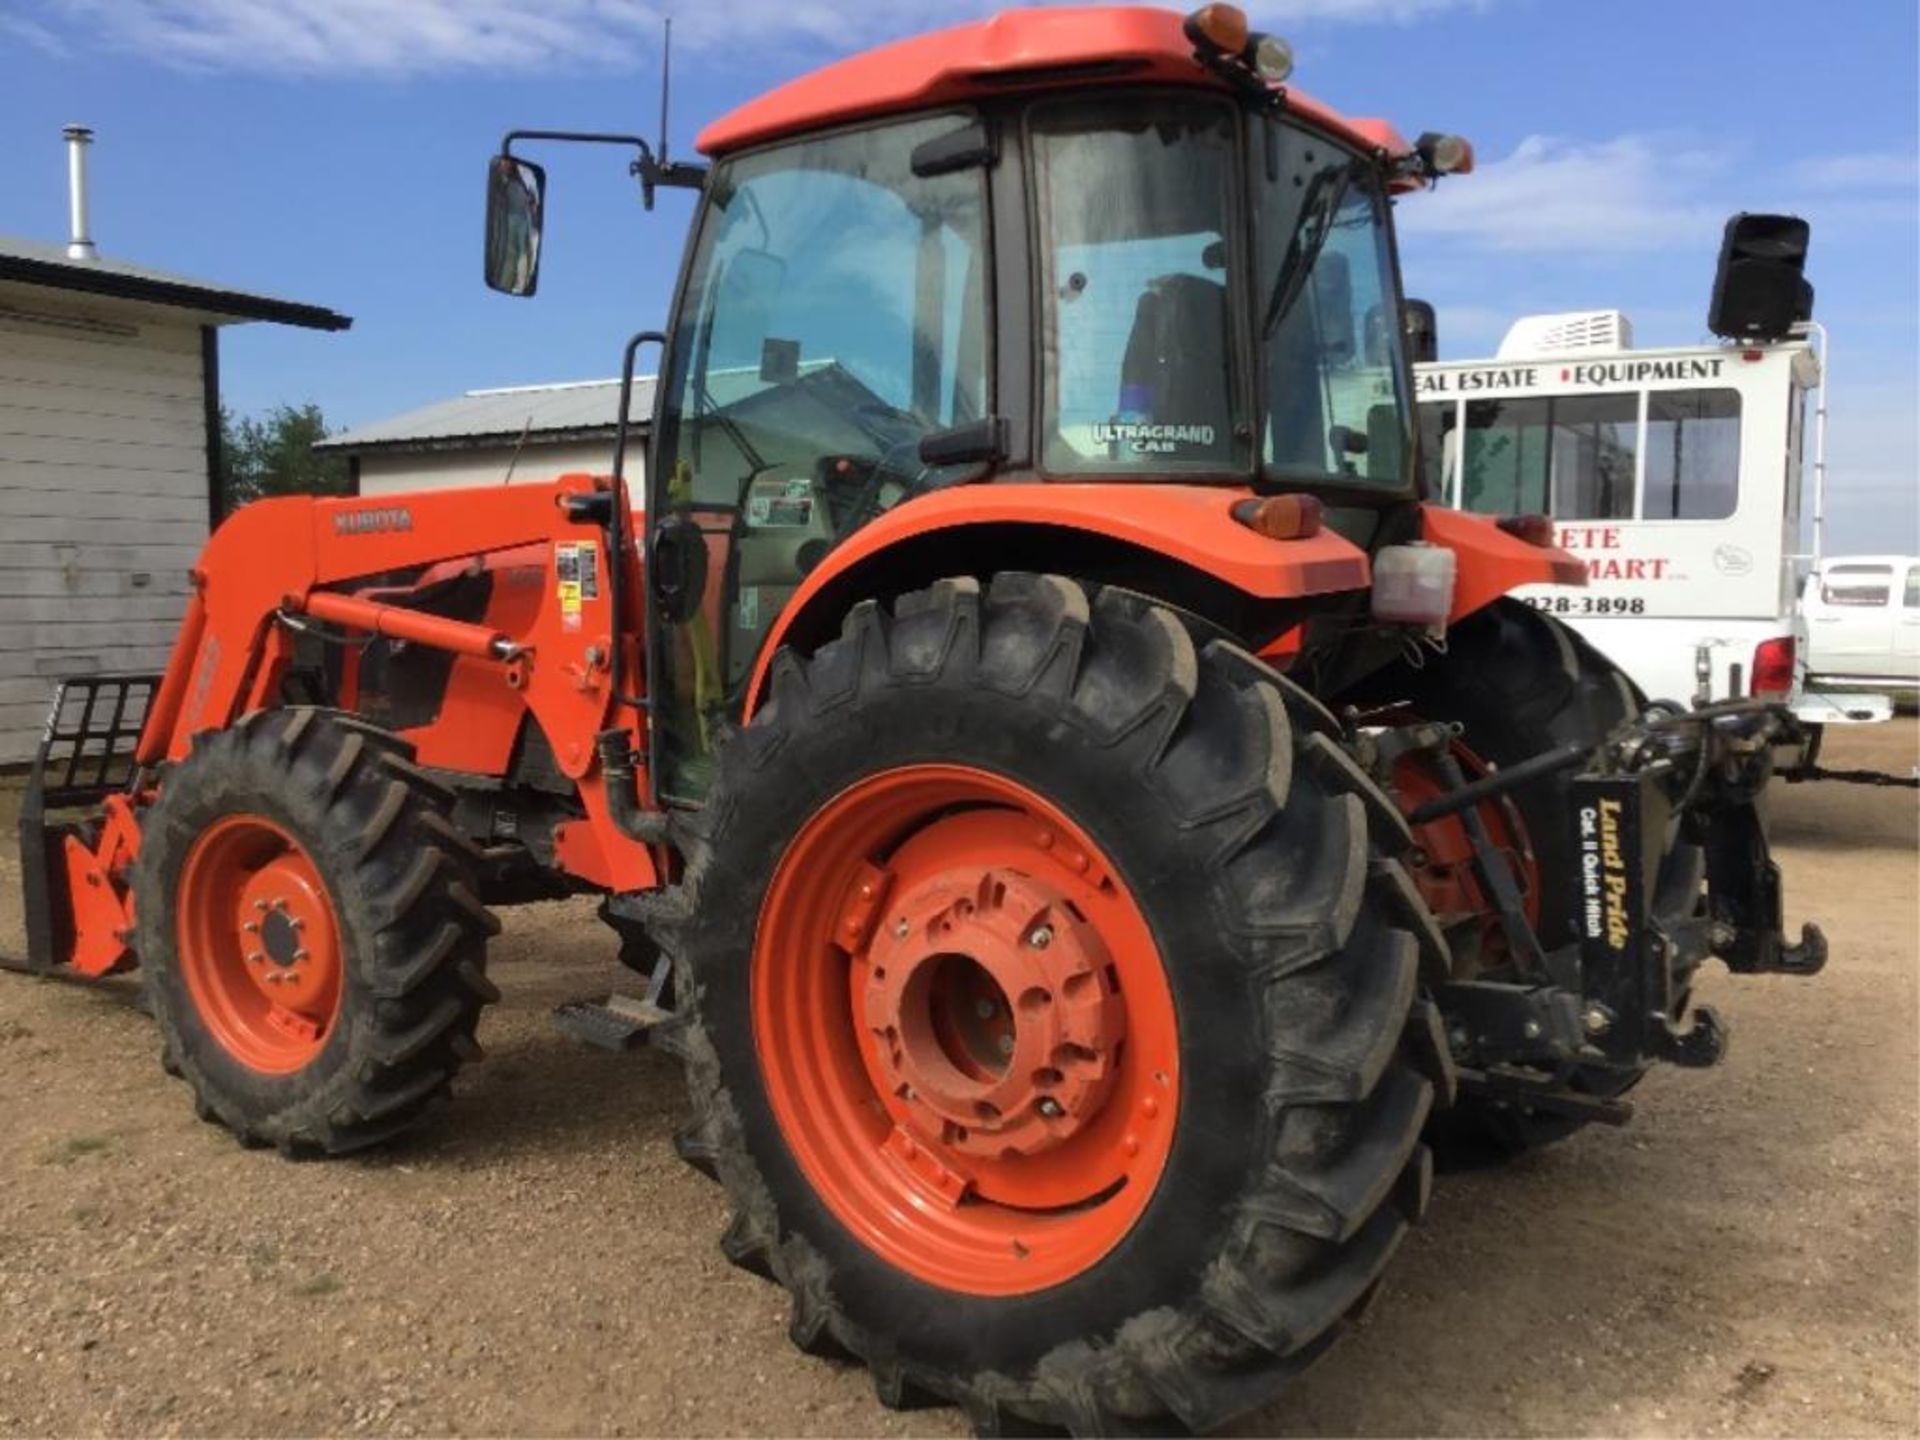 2011 M9540 Kubota Tractor W/ LA353 Front End Loader & Bucket, 2 Forks(may sell sepesrate), 1104 - Image 6 of 12